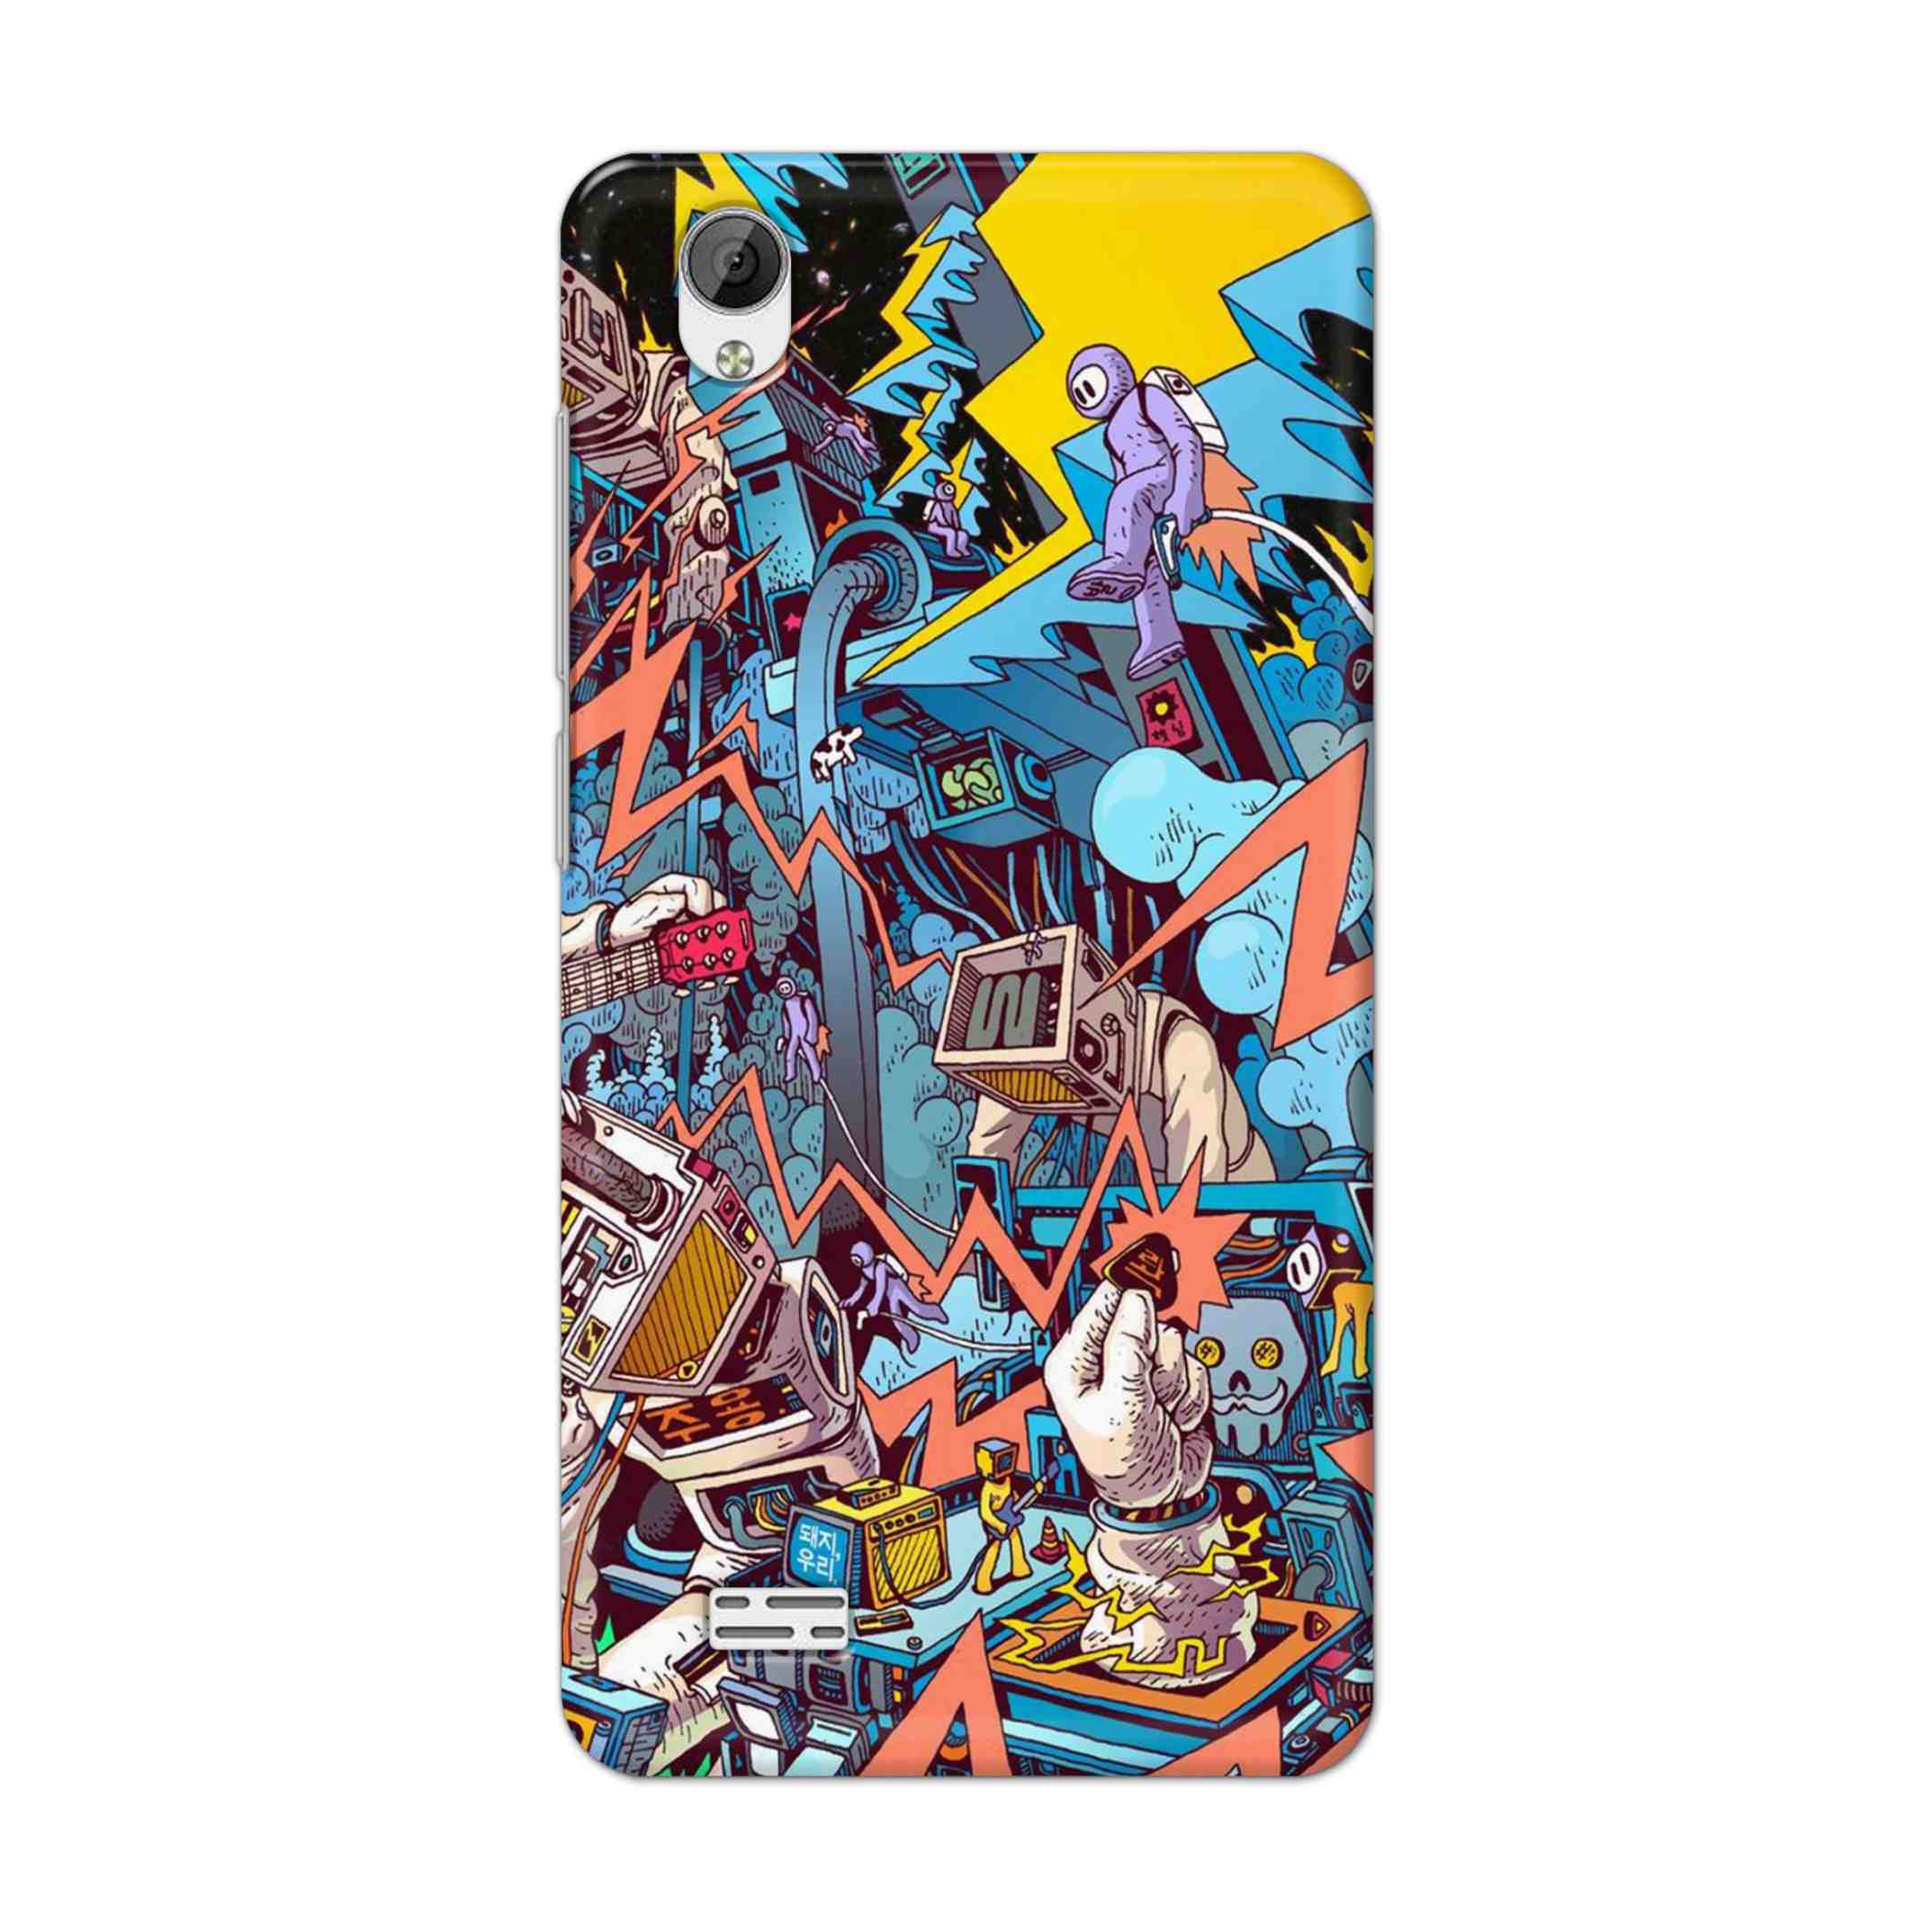 Buy Ofo Panic Hard Back Mobile Phone Case Cover For Vivo Y31 Online